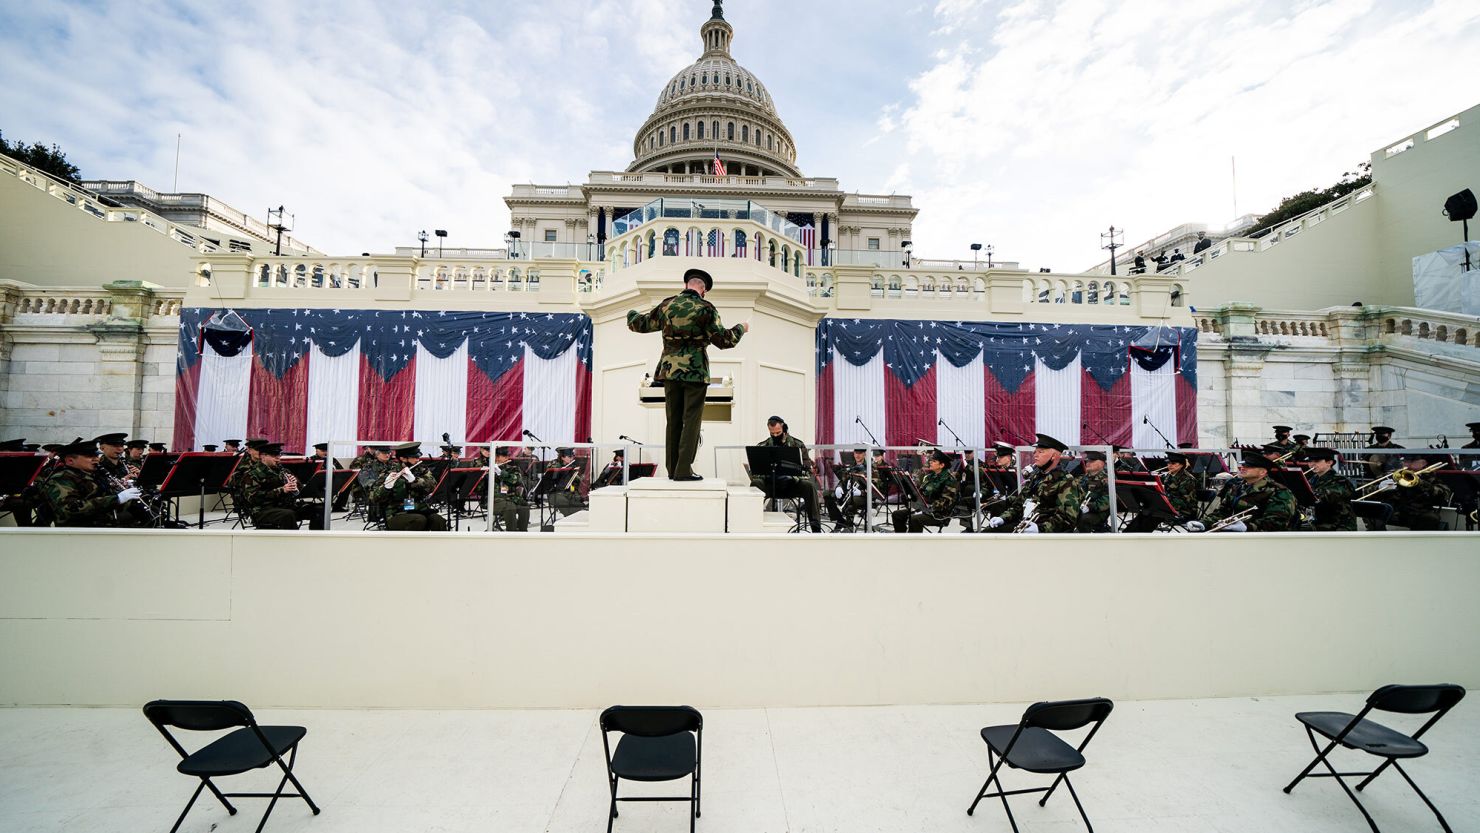 Rehearsals for the inaugural ceremony for President-elect Joe Biden and Vice President-elect Kamala Harris proceed at the US Capitol on January 18, 2021 in Washington, DC. 